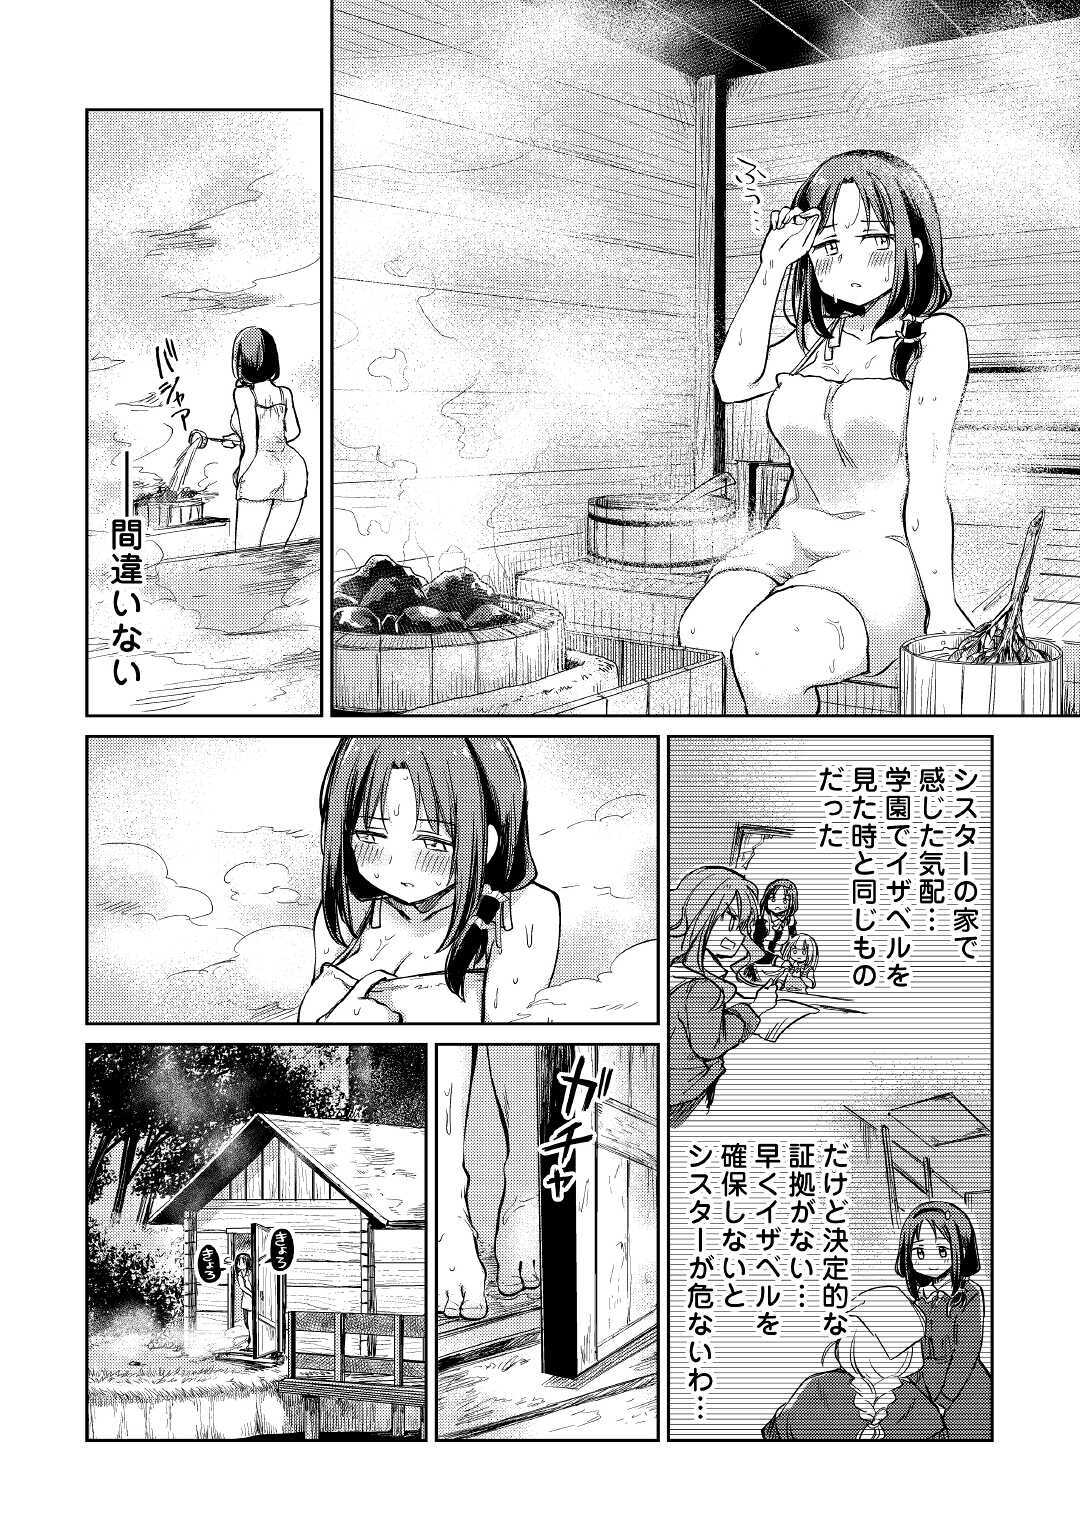 The Former Structural Researcher’s Story of Otherworldly Adventure 第31話 - Page 28